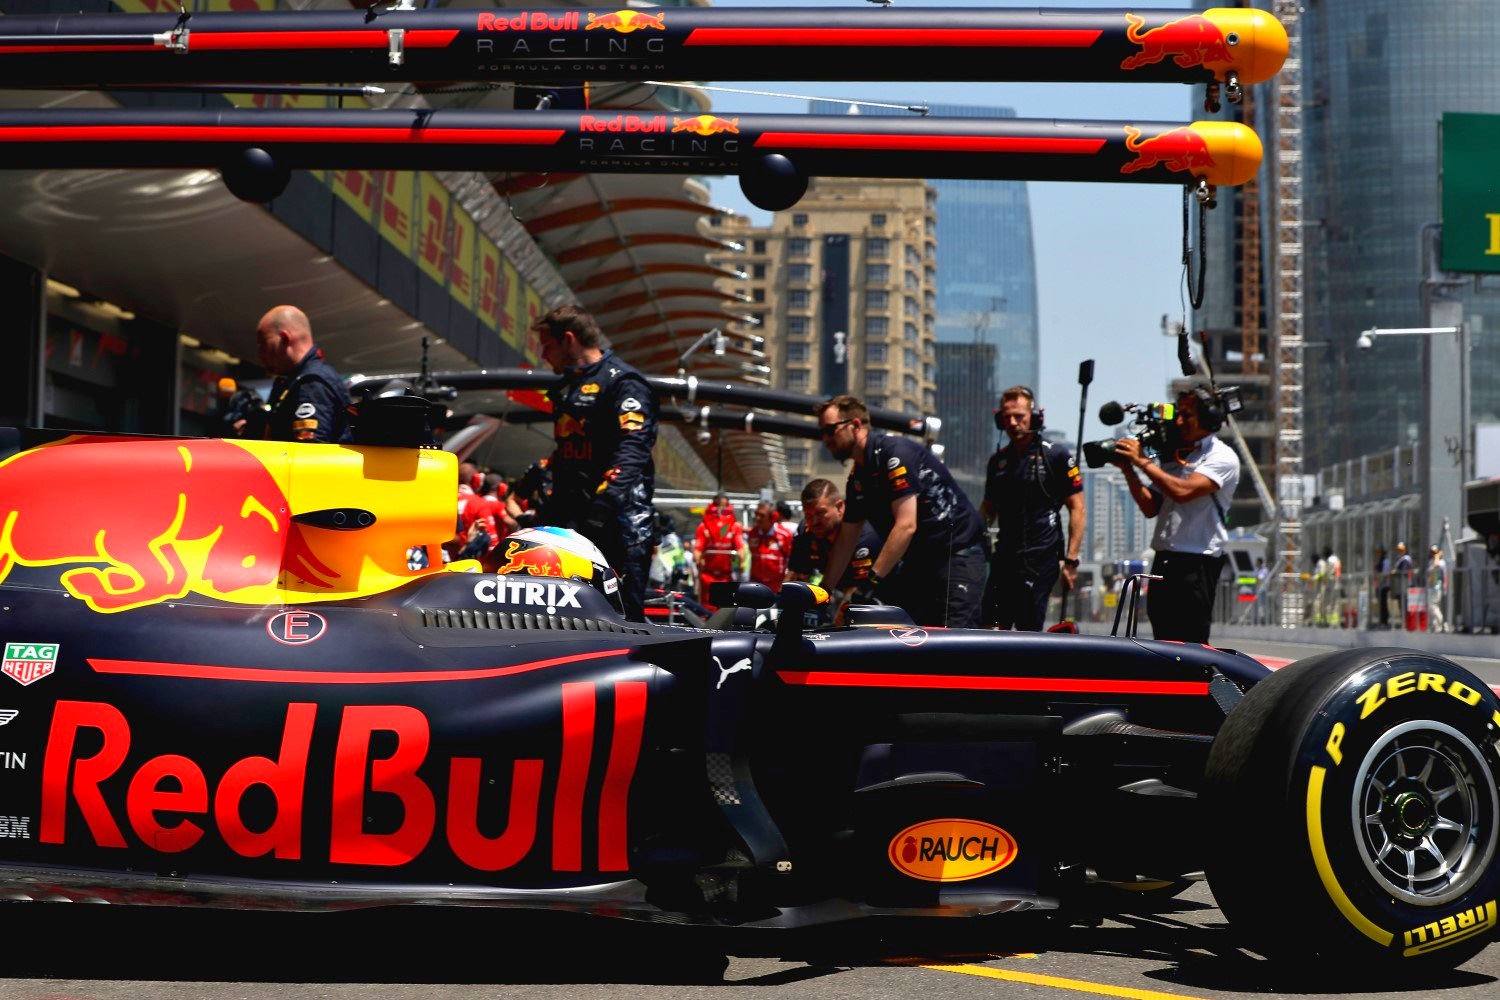 The new Renaukt engine helped propel Red Bull to the front Friday